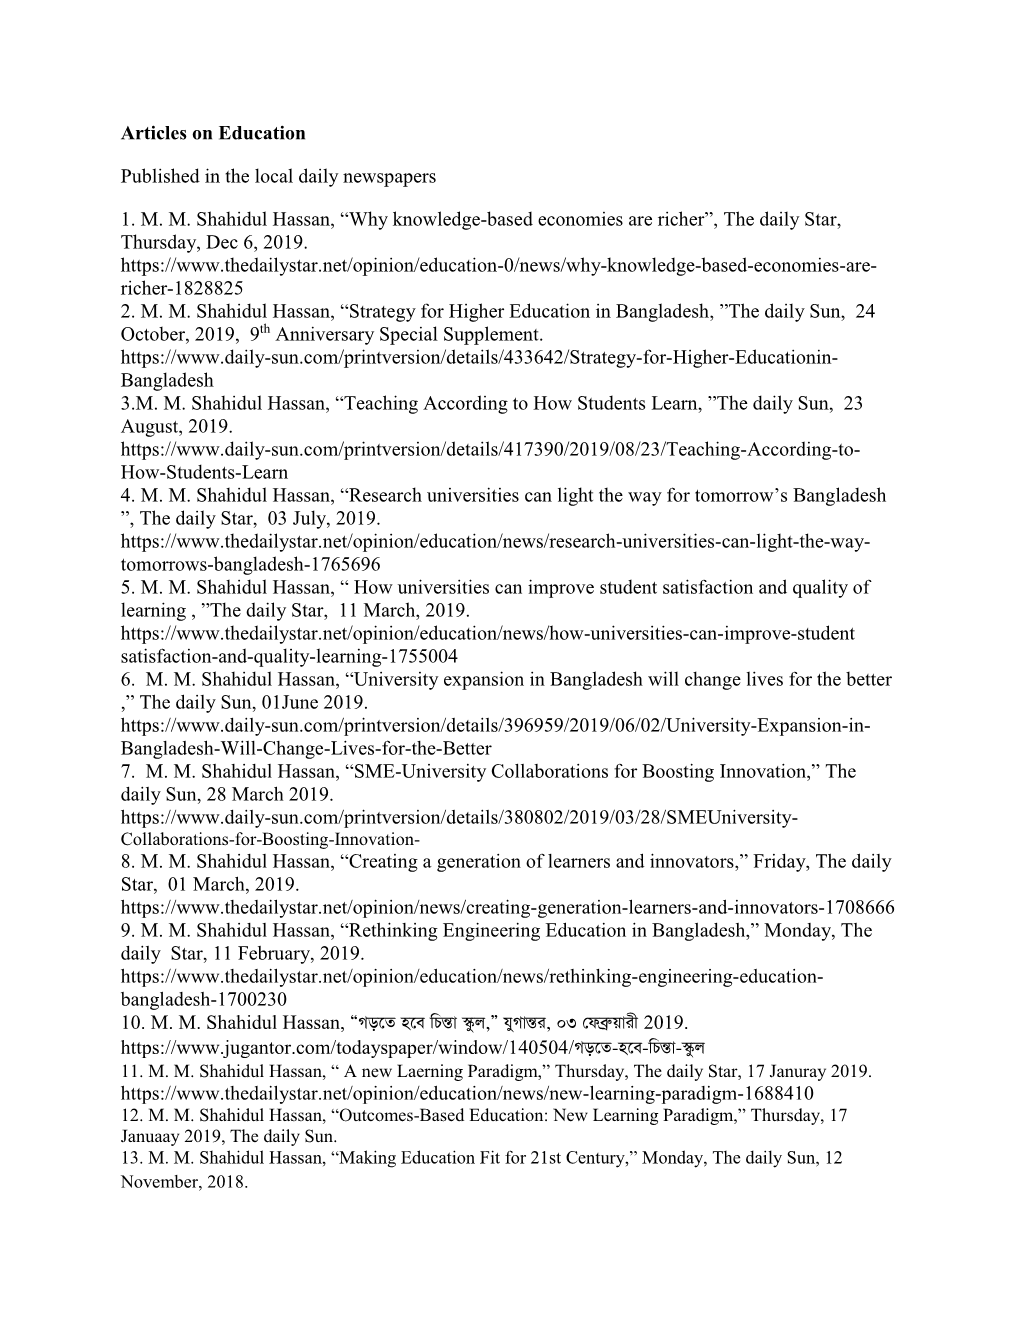 Articles on Education Published in the Local Daily Newspapers 1. M. M. Shahidul Hassan, “Why Knowledge-Based Economies Are